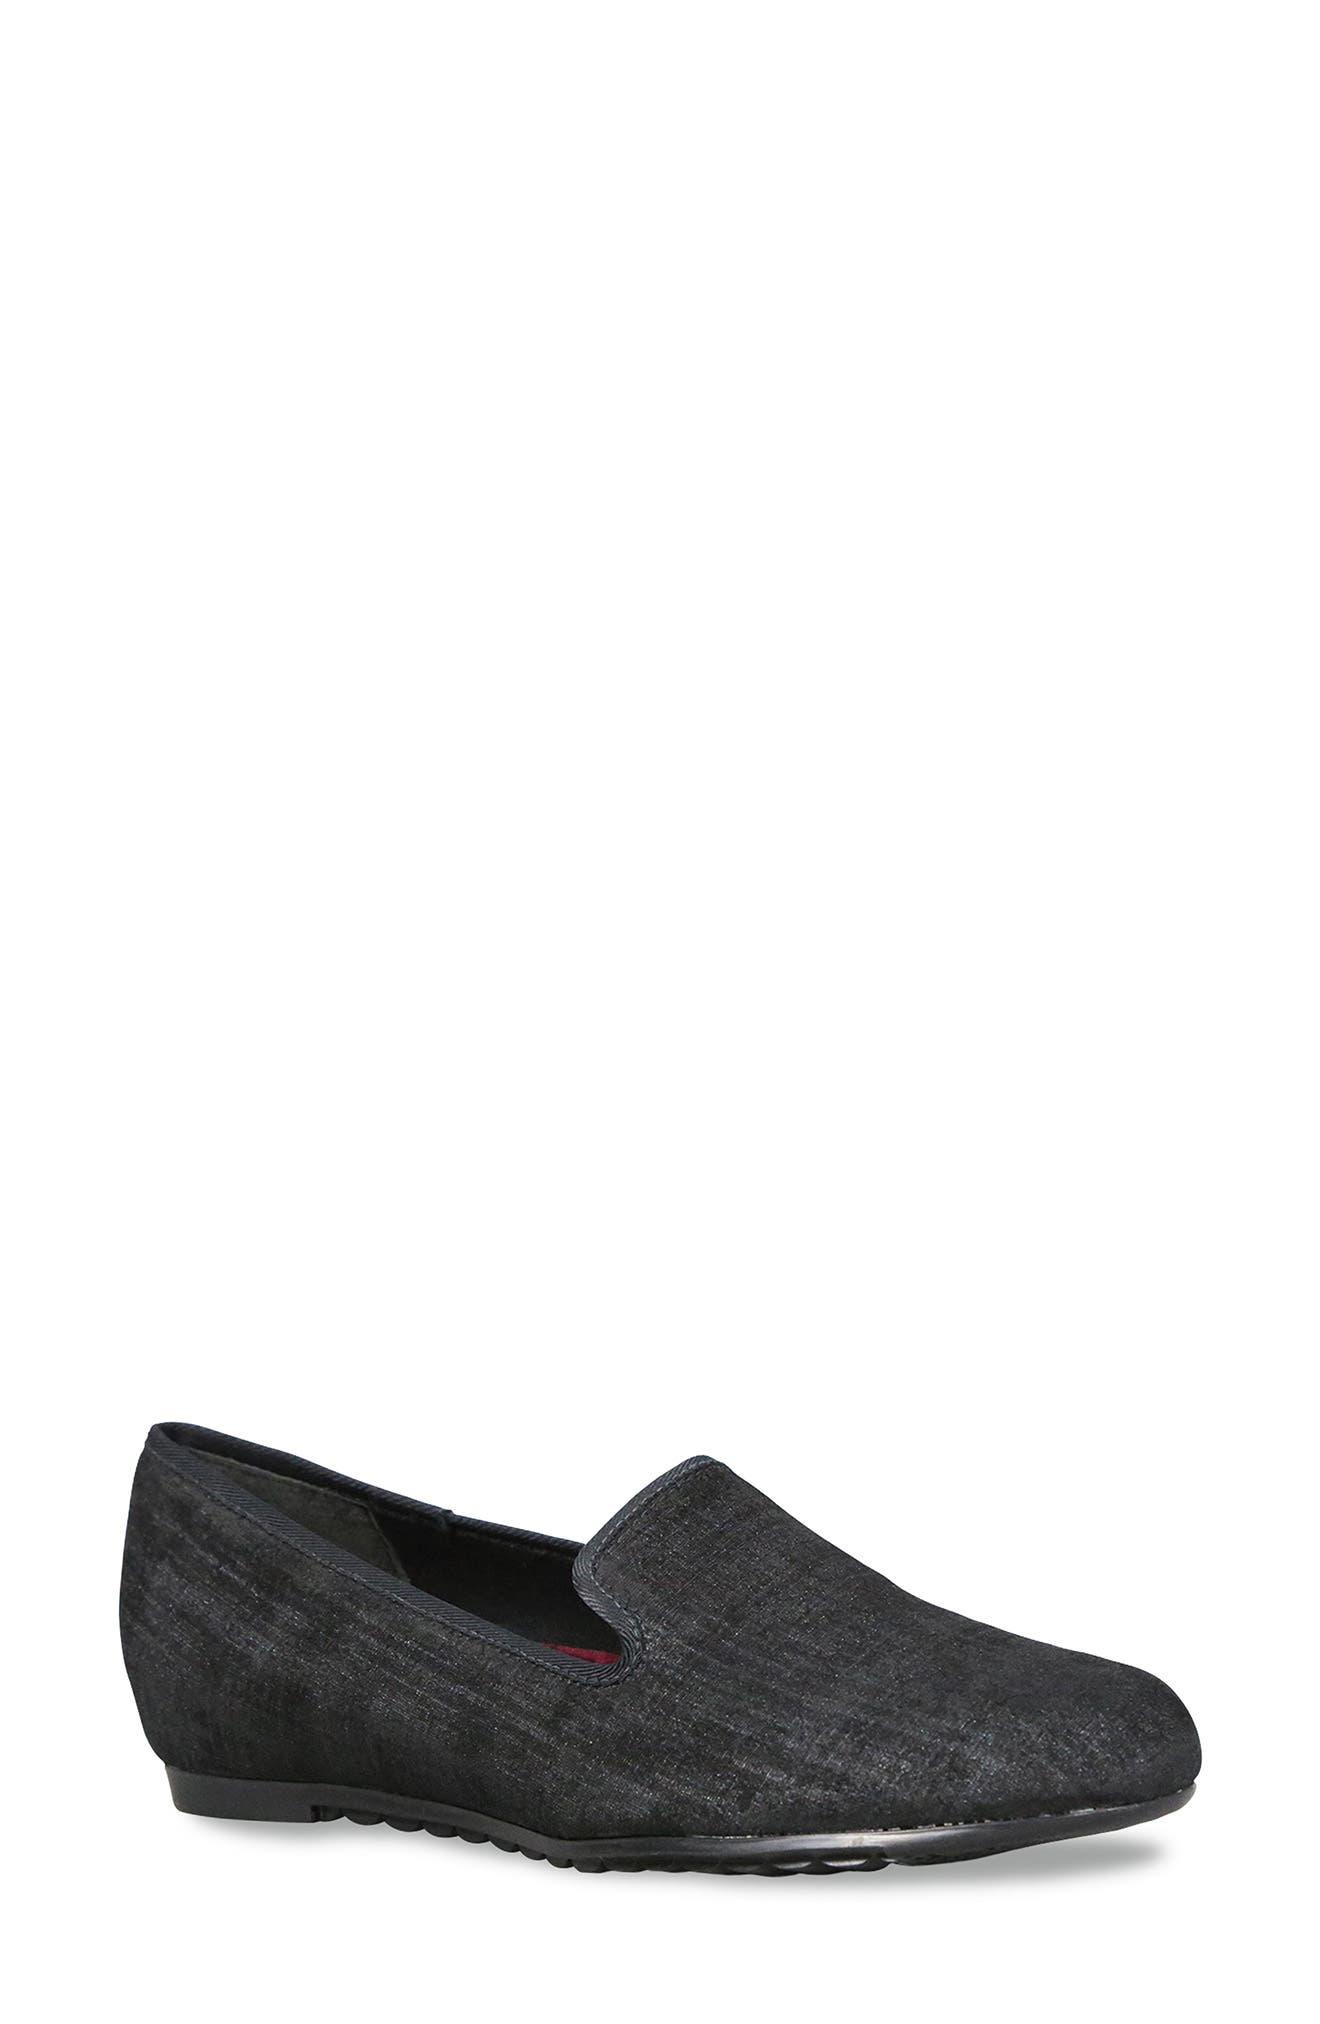 Women's Flats Munro Shoes | Nordstrom